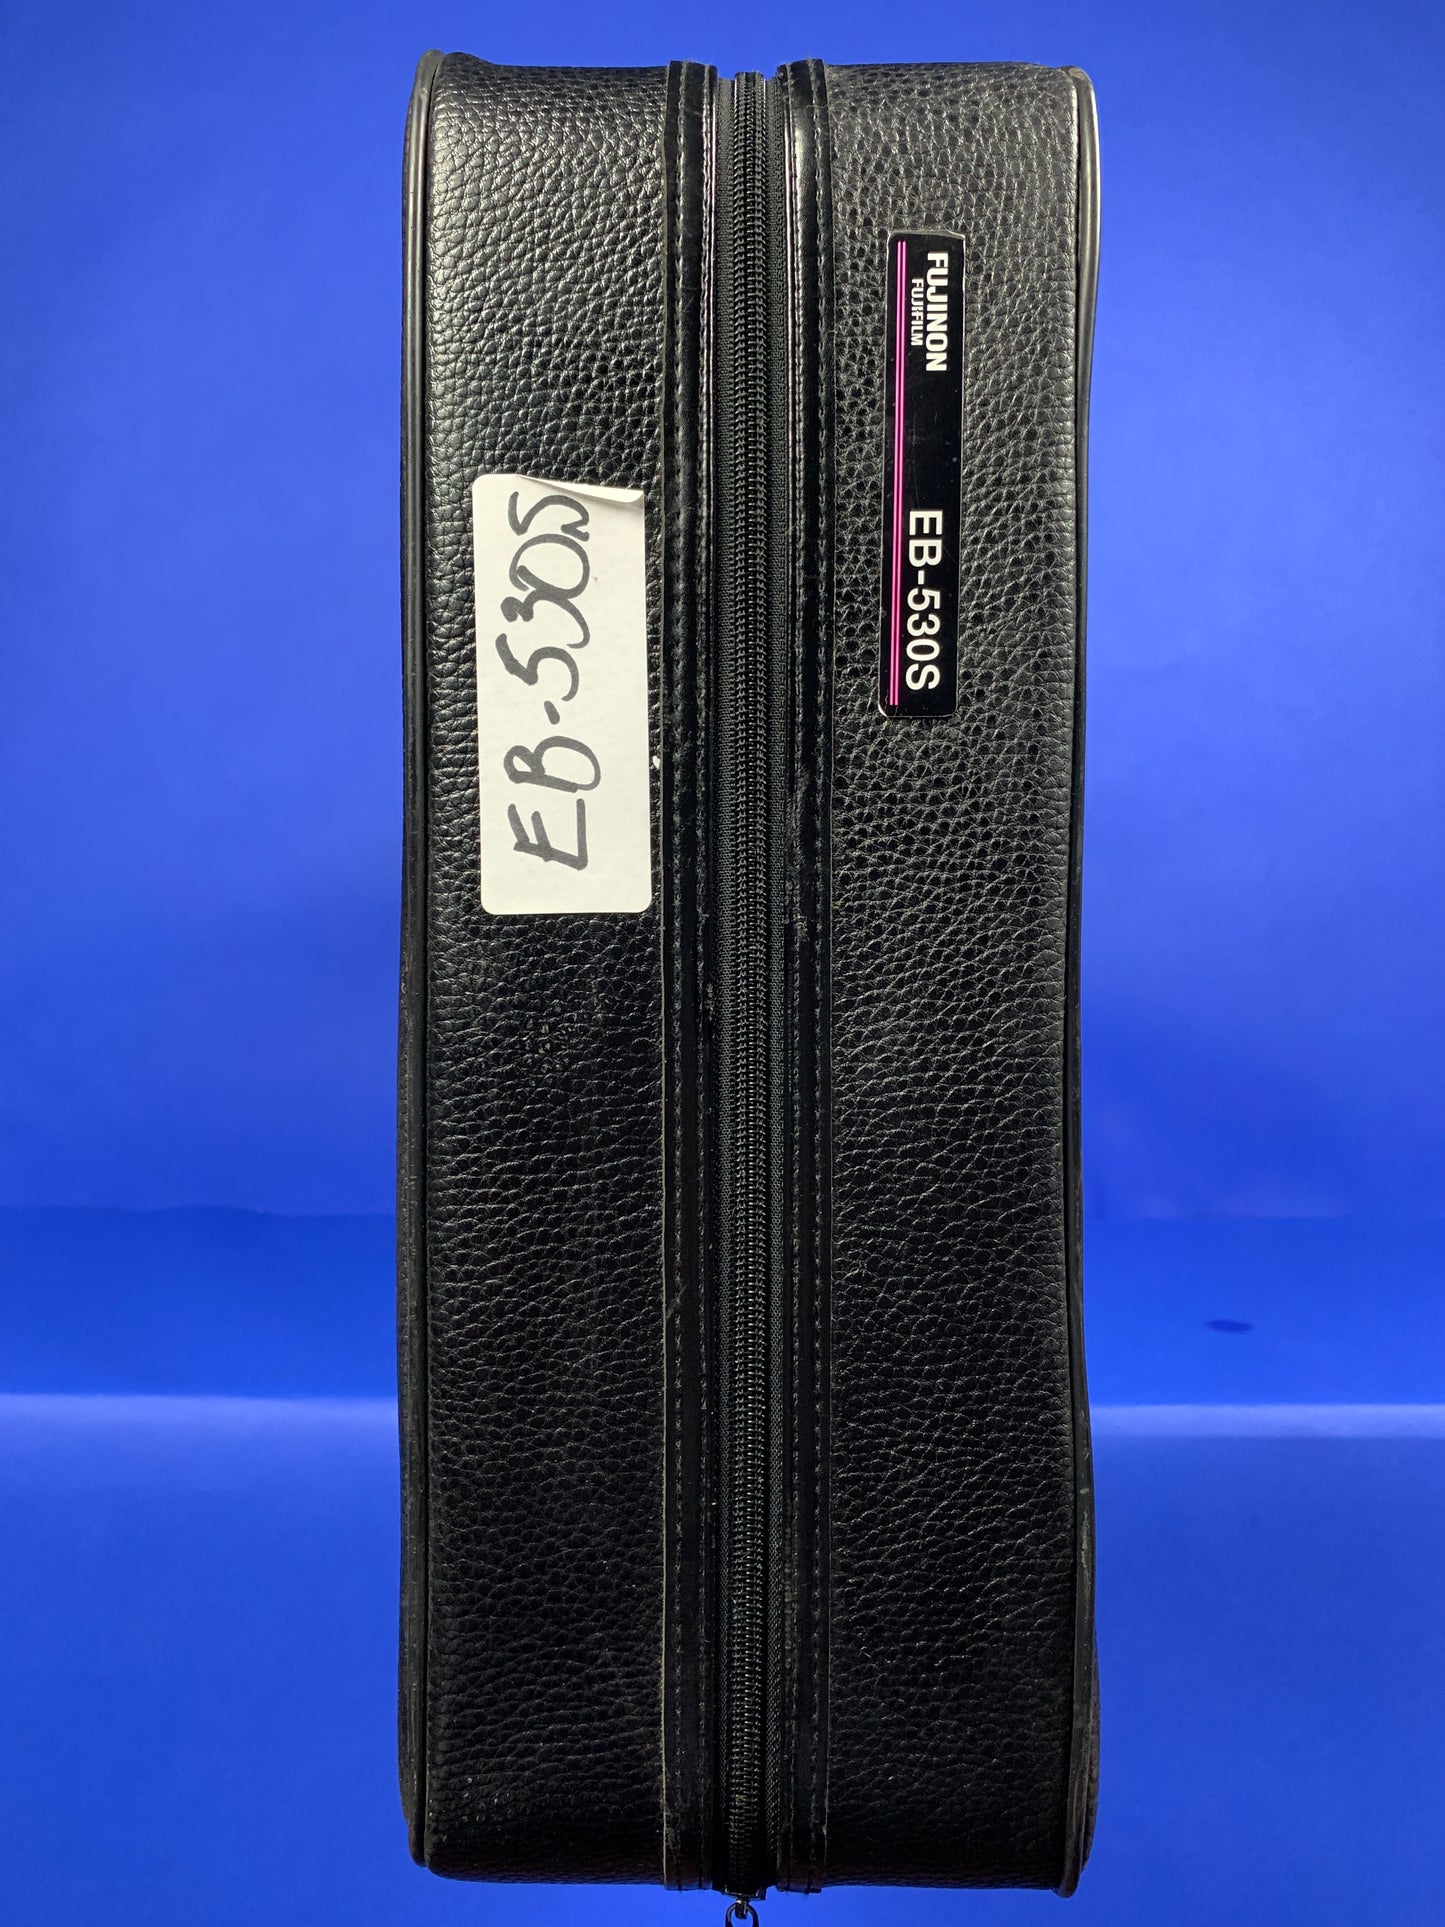 EB-530S Video Bronchoscope Carry Case is in excellent condition.